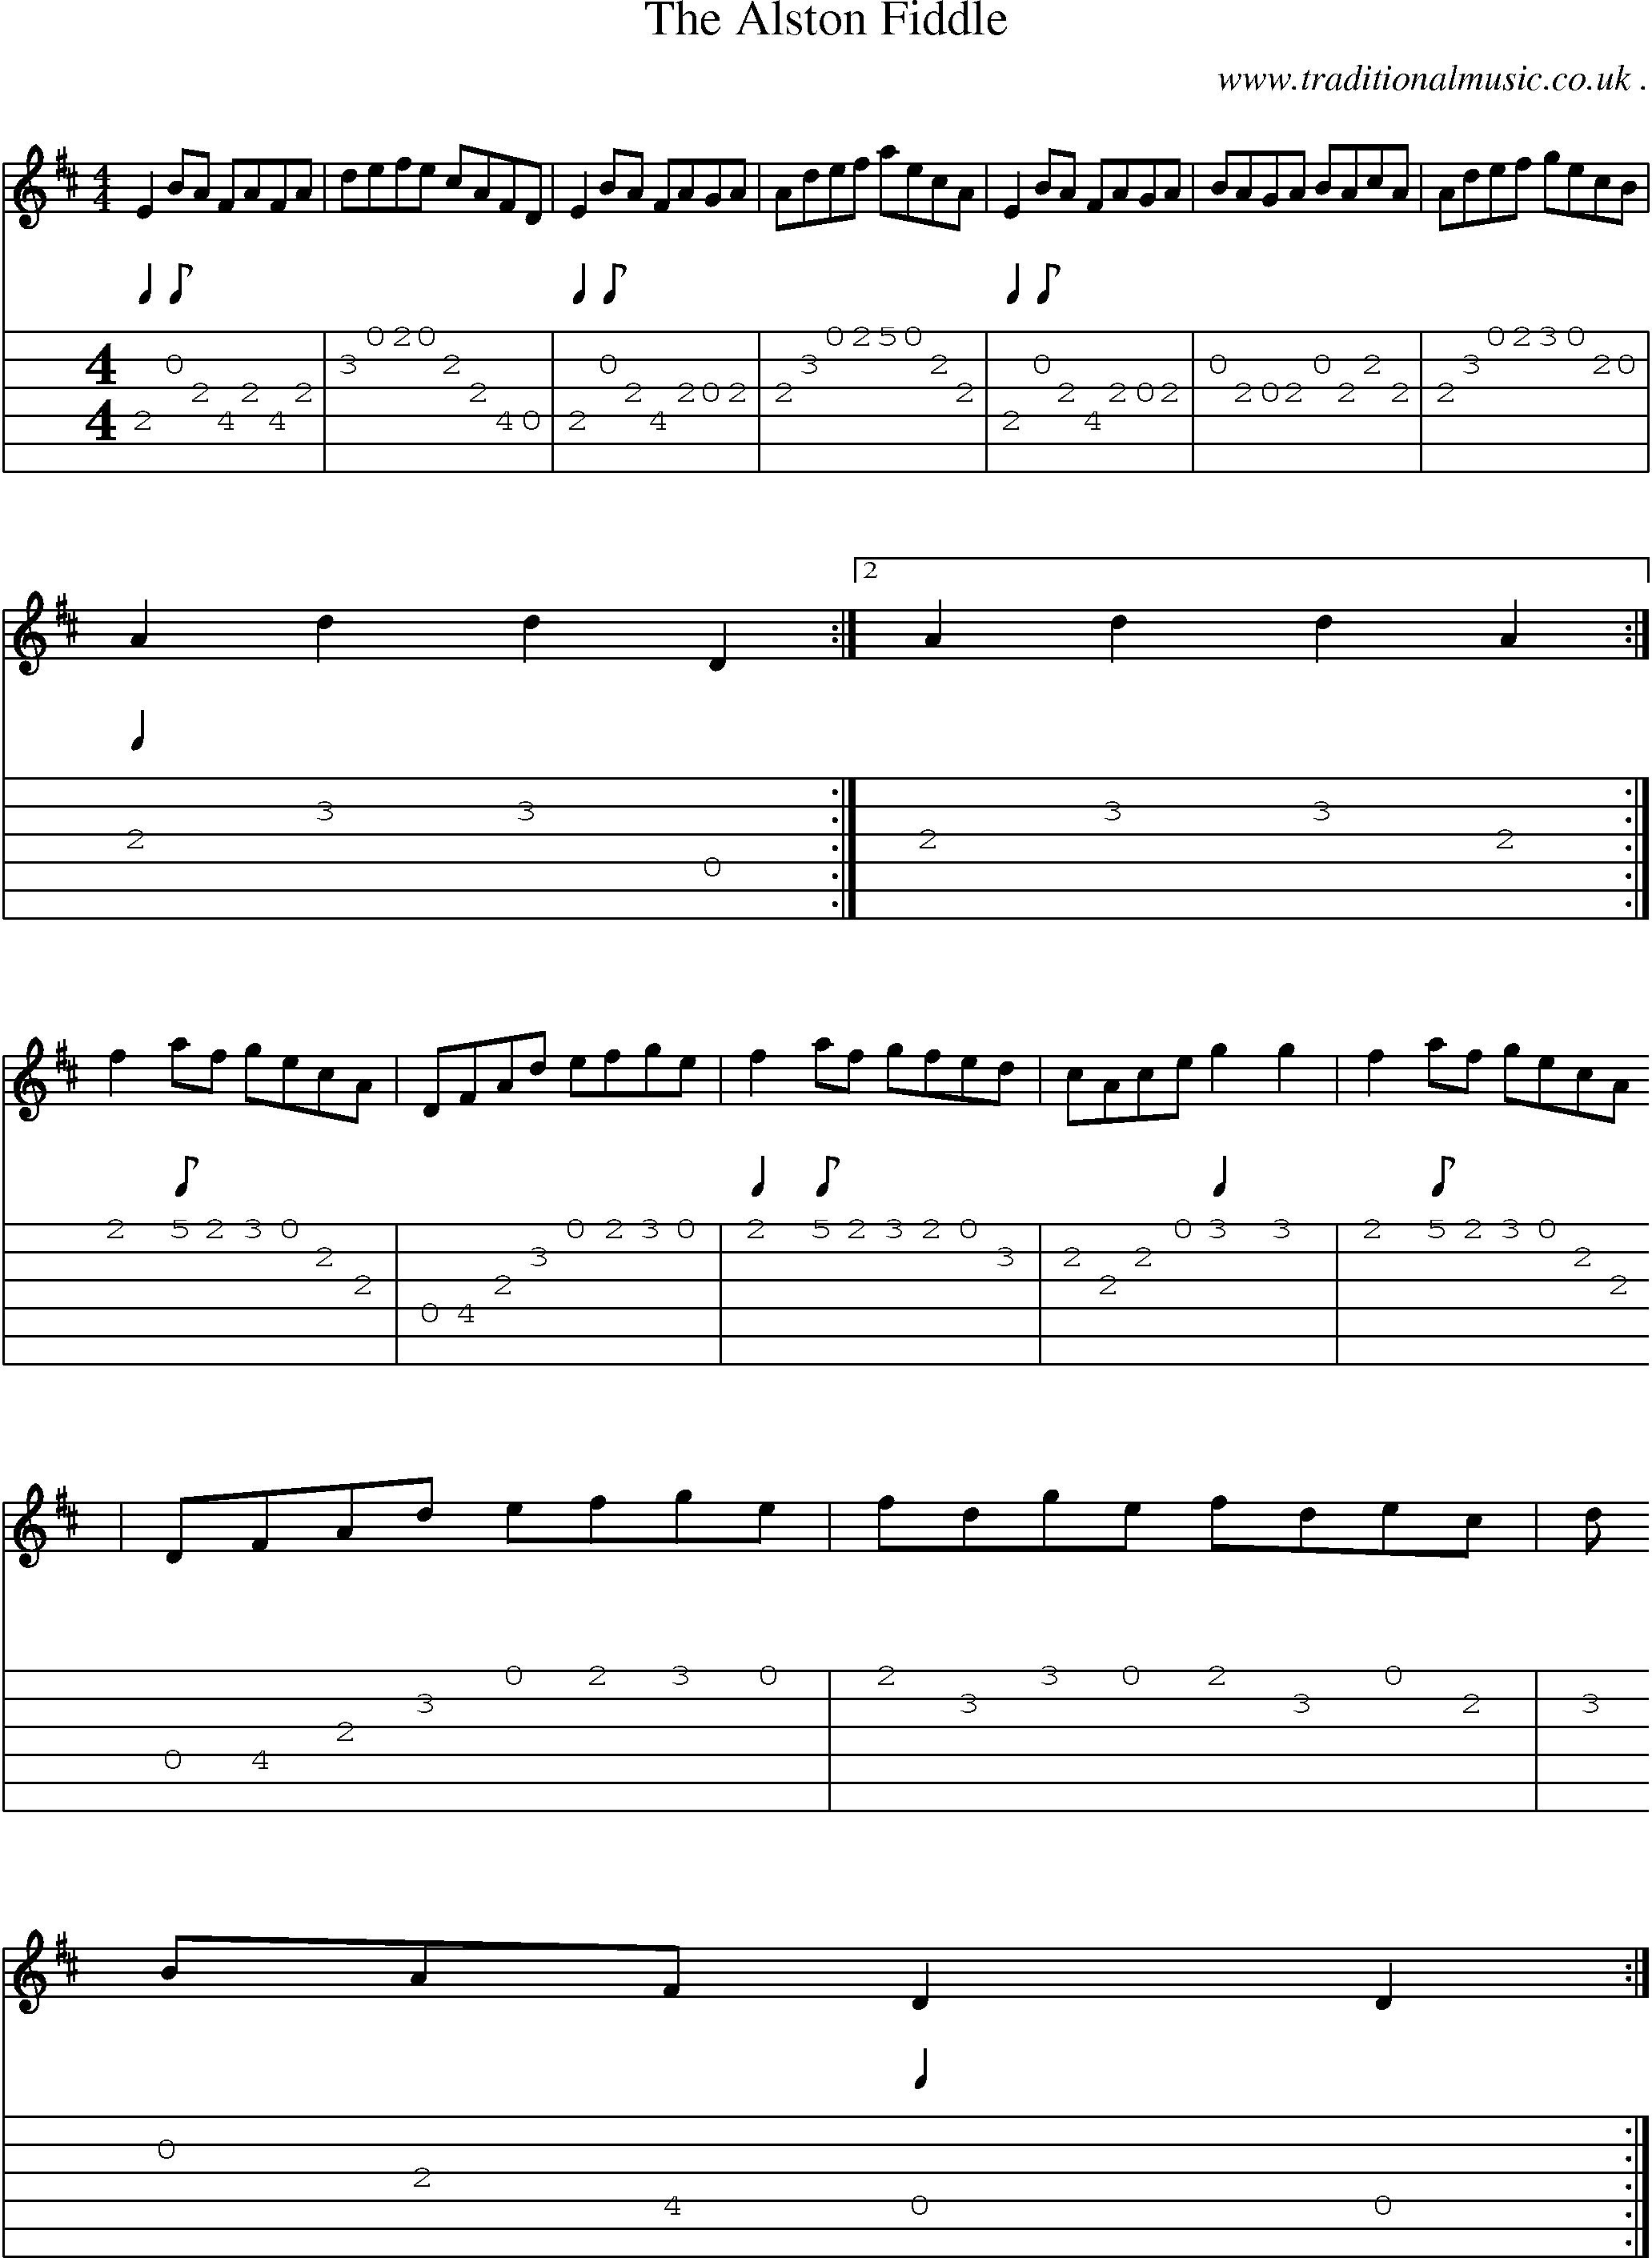 Sheet-Music and Guitar Tabs for The Alston Fiddle